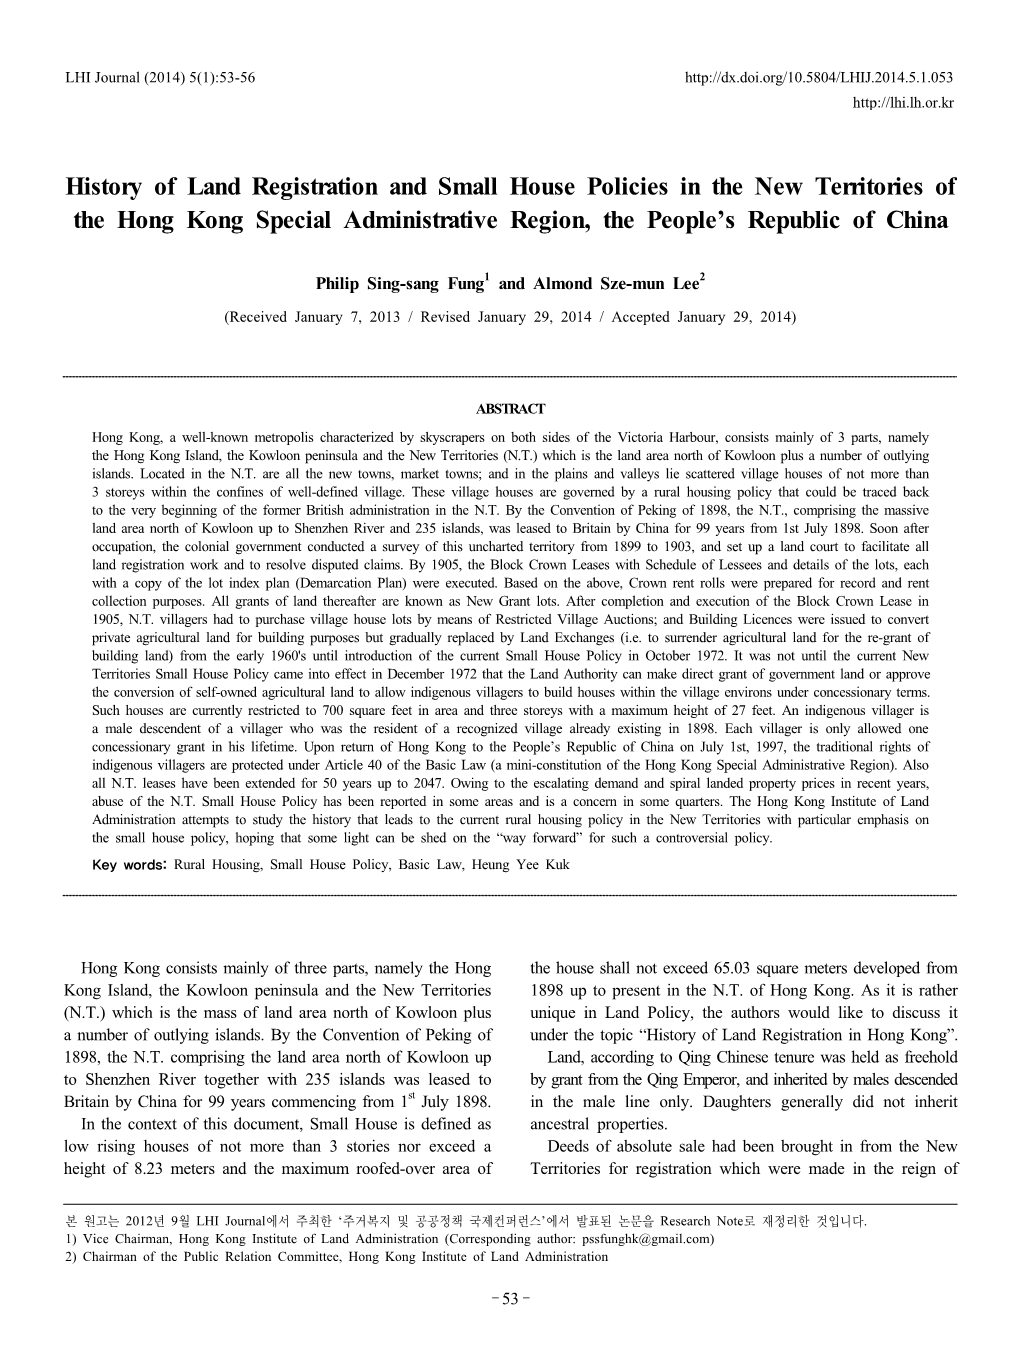 History of Land Registration and Small House Policies in the New Territories of the Hong Kong Special Administrative Region, the People’S Republic of China